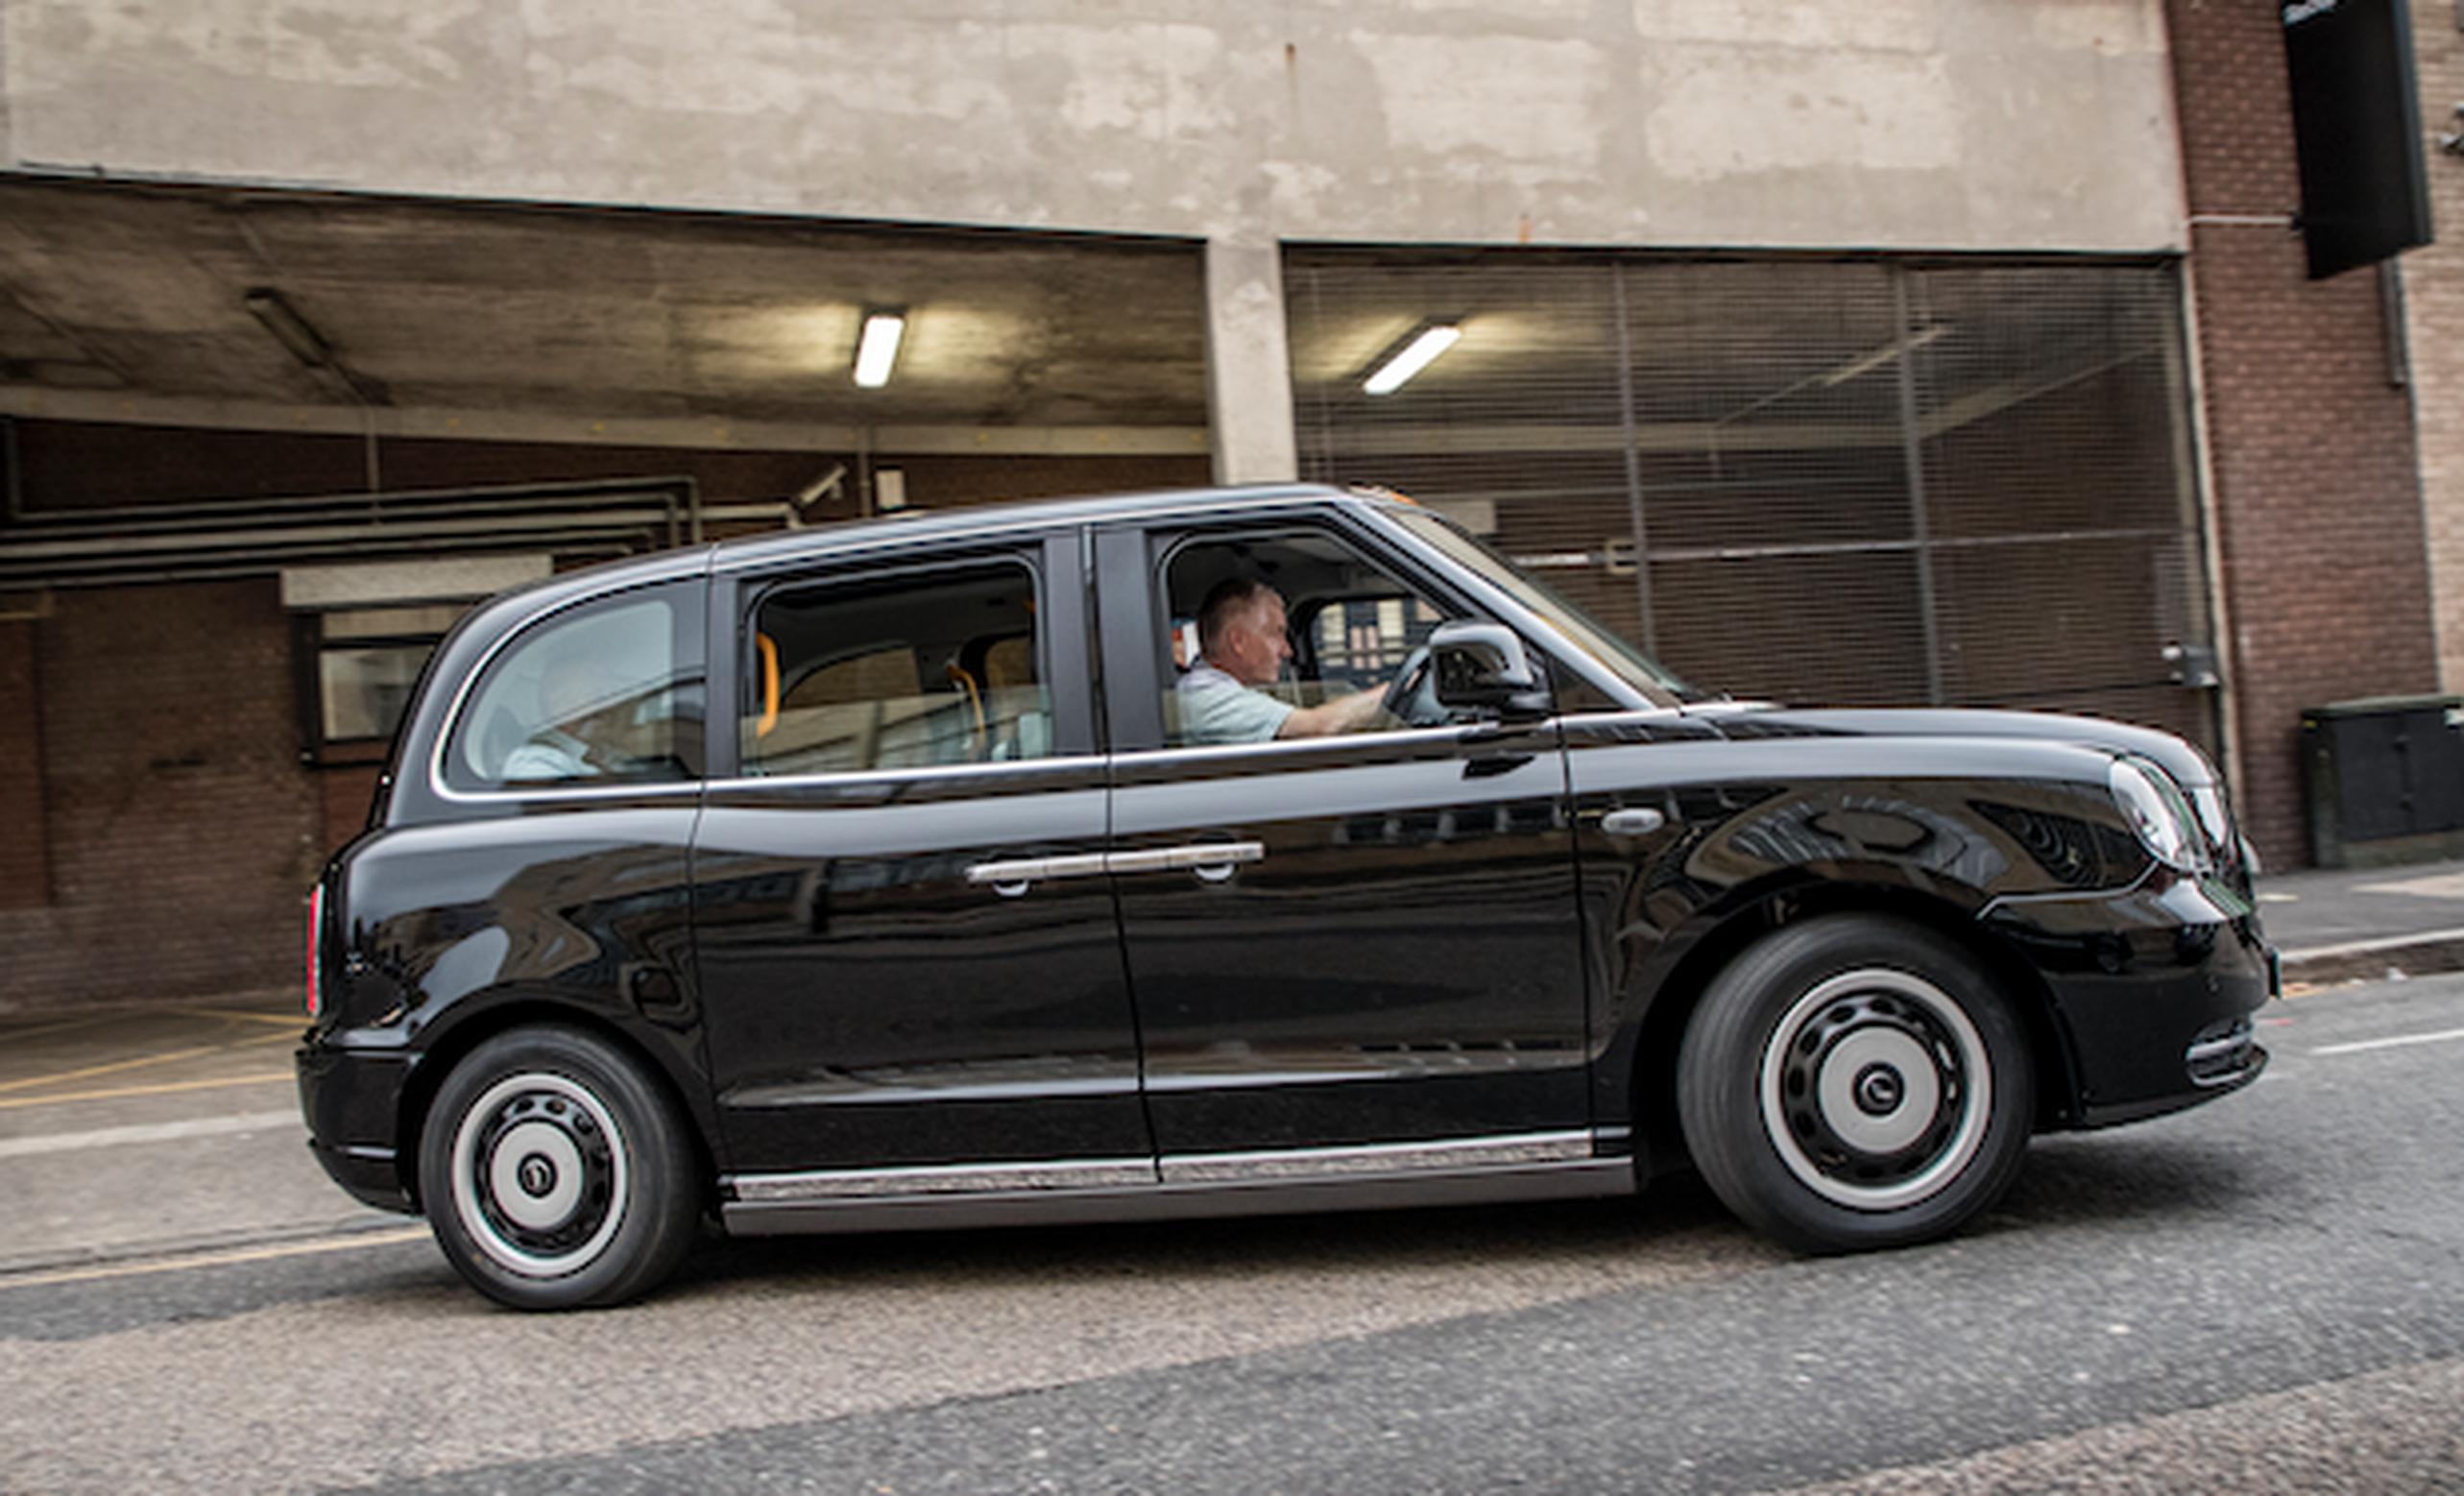 Real London cabbies are now test driving LEVC`s electric taxi.